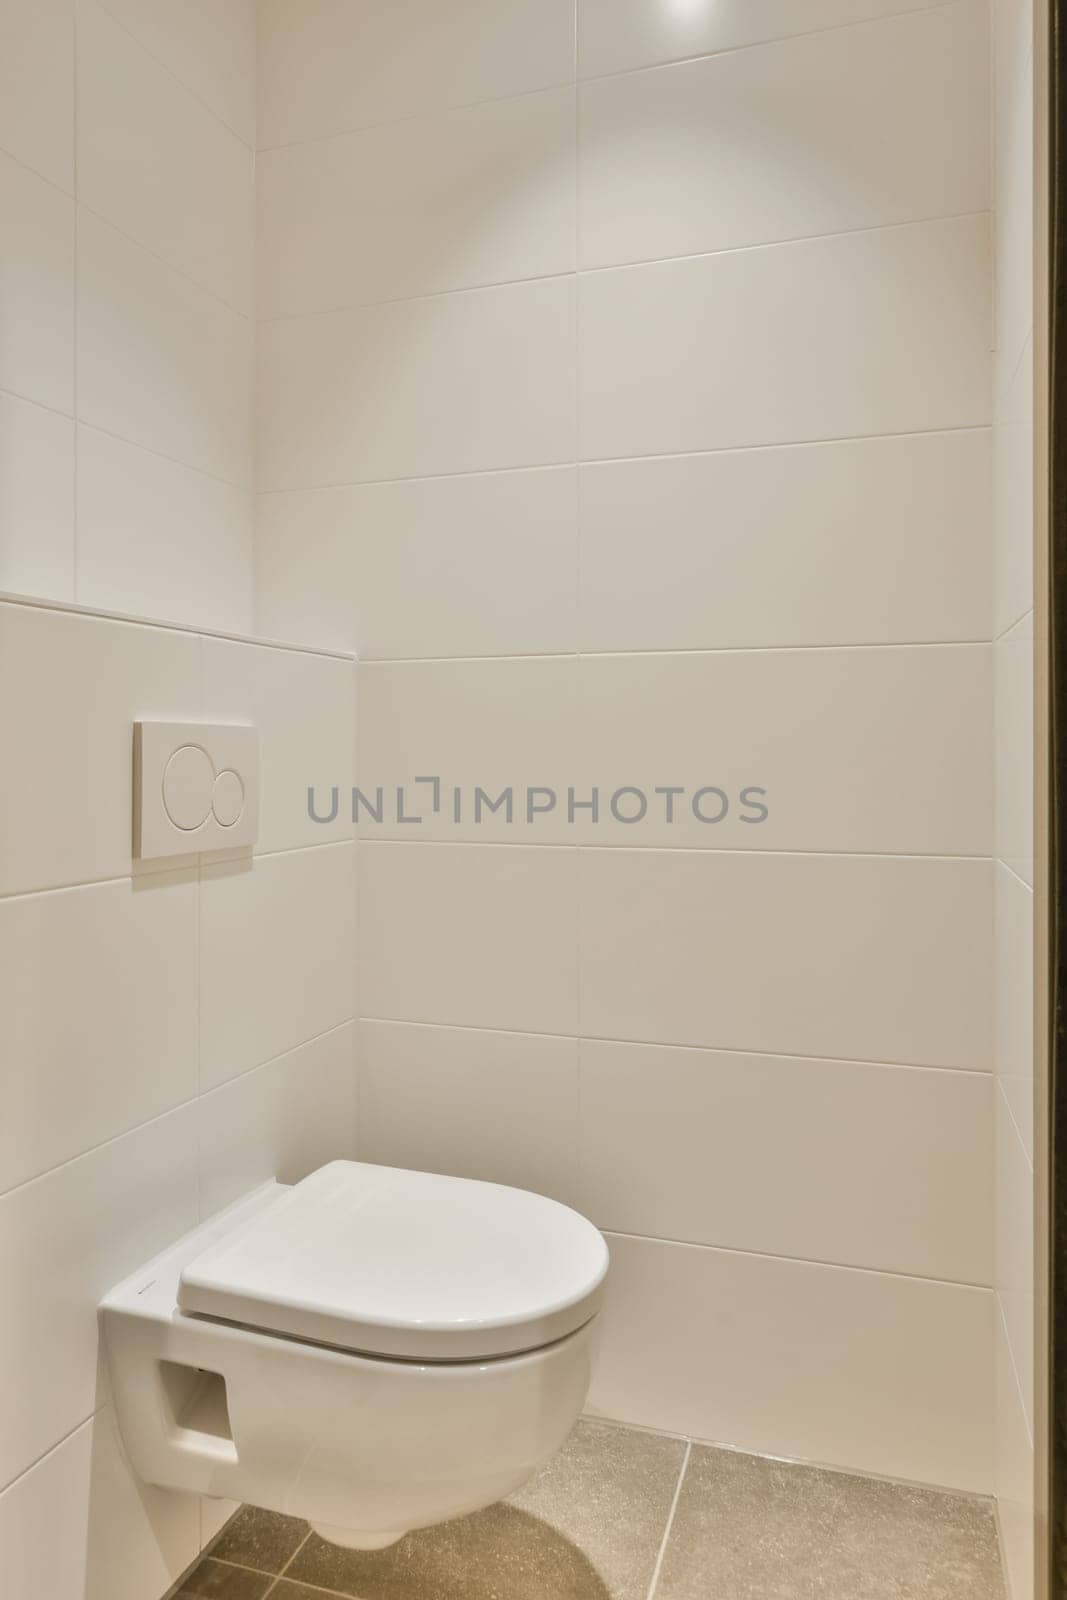 a toilet in the corner of a bathroom stall with white tiles on the floor and walls, all around it